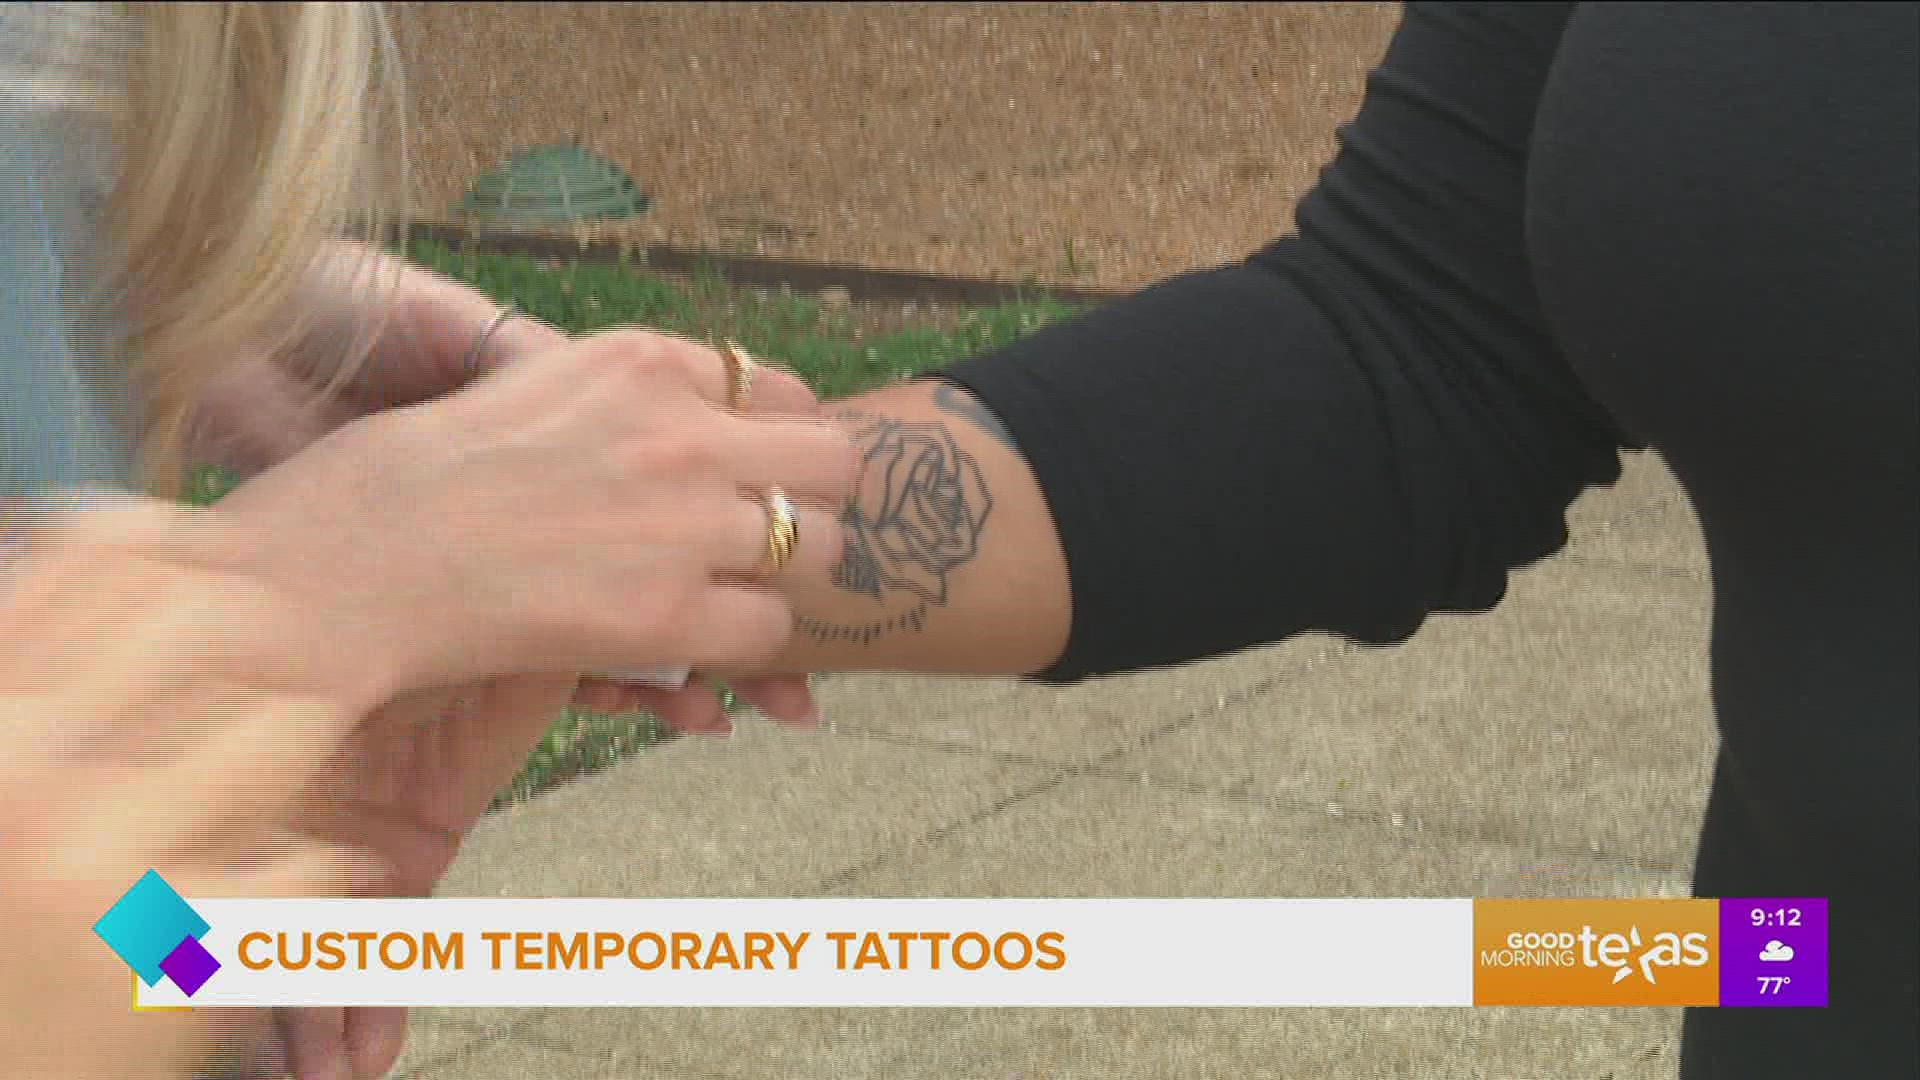 Words for a Season owner, Abi Gallagher, showcases some of her body ink and talks about how temporary tattoos have evolved as the summer trend.